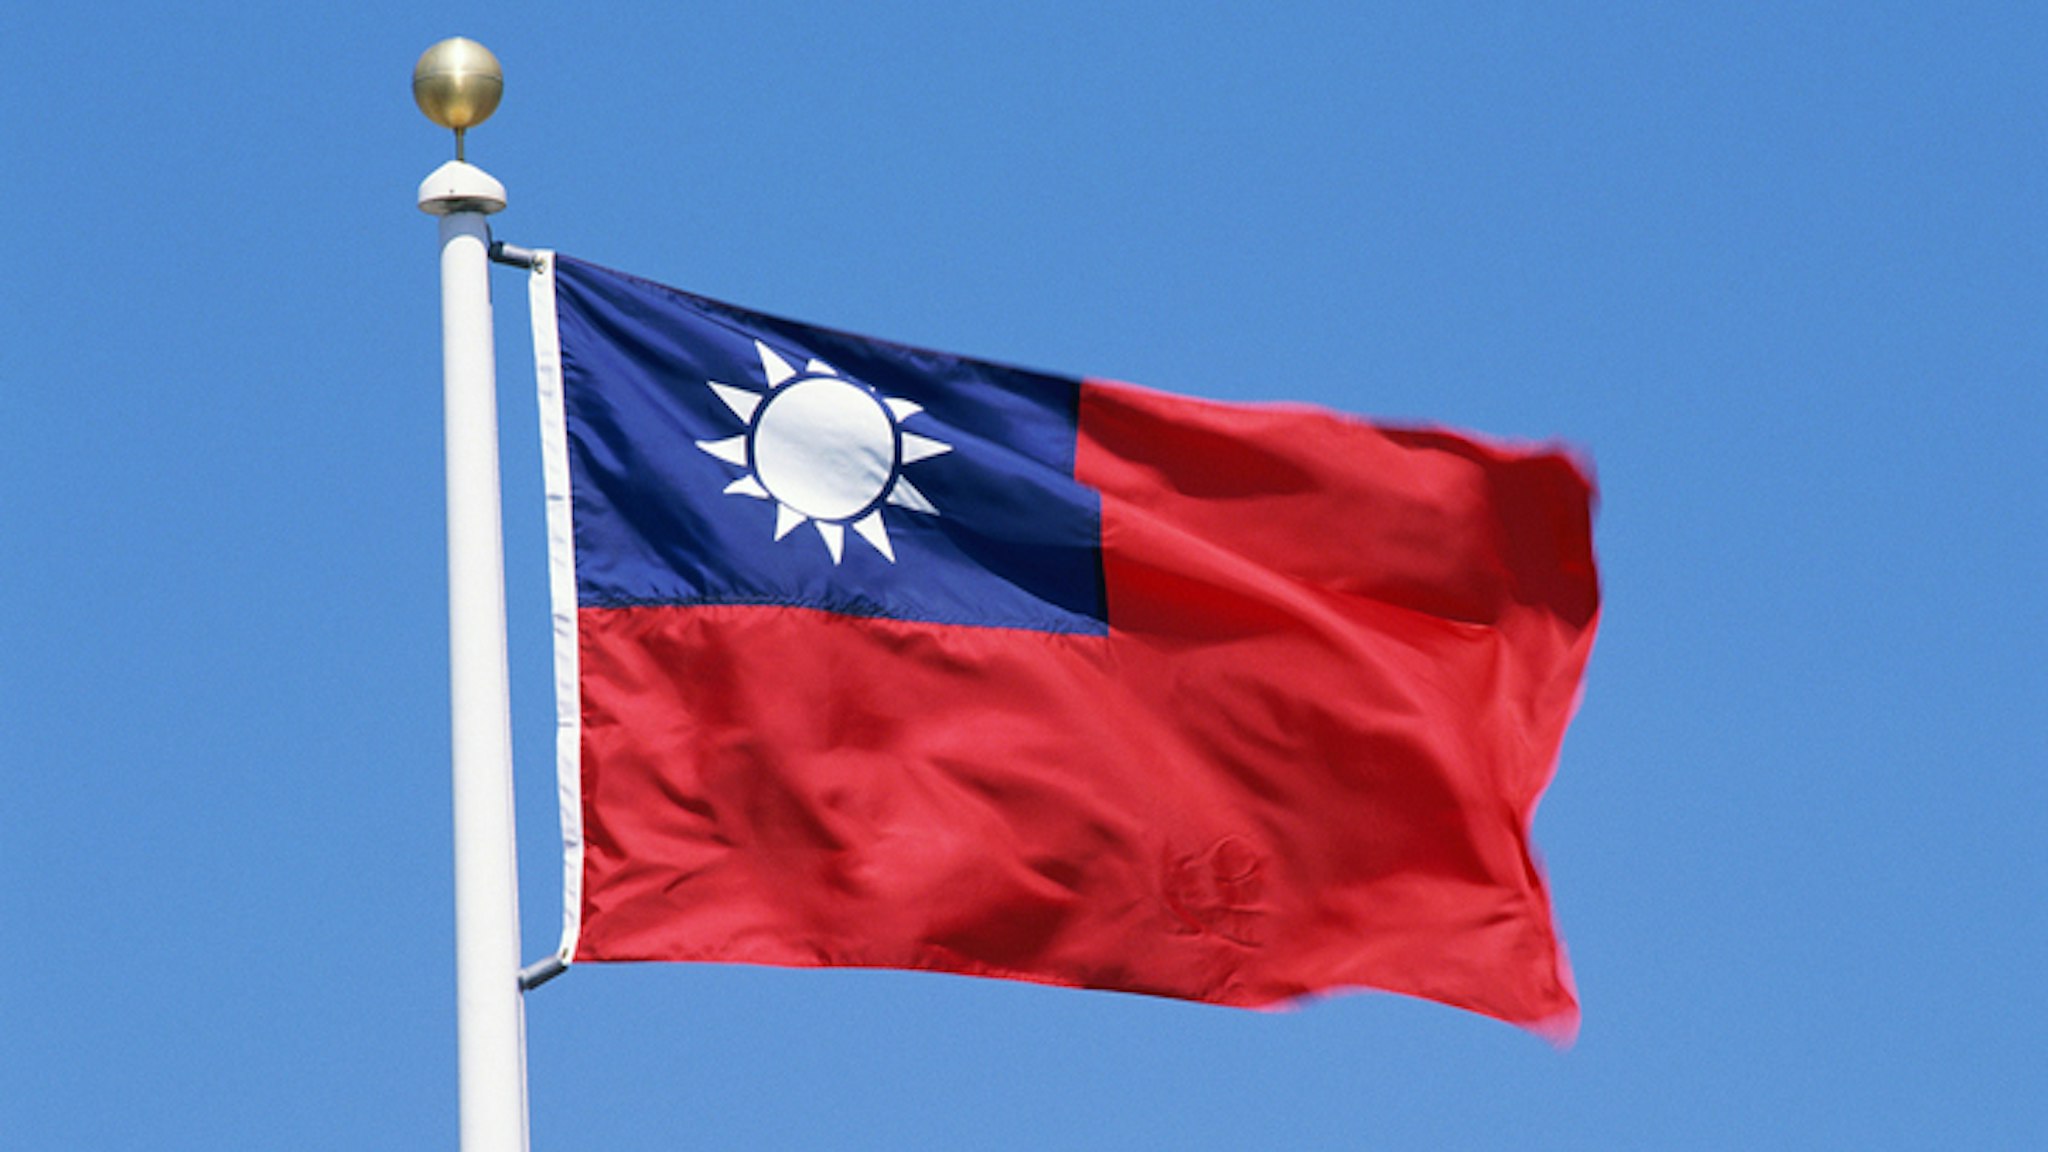 Flag of Taiwan - stock photo Stockbyte via Getty Images